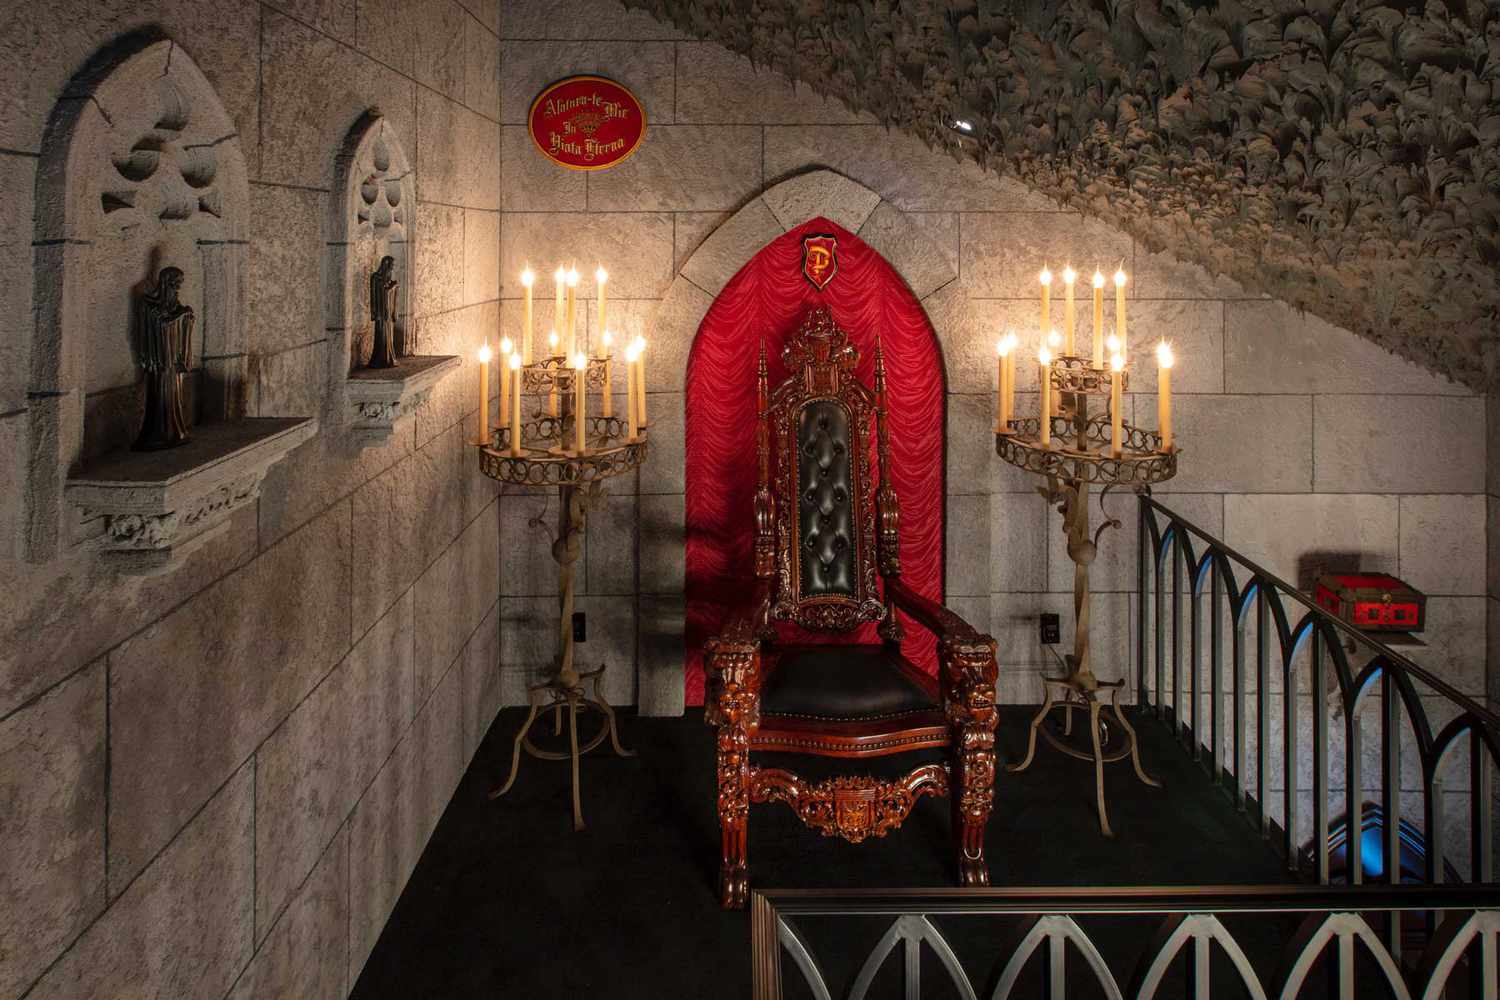 You Can Live Out Your 'Game of Thrones' Fantasy at This Themed Cottage